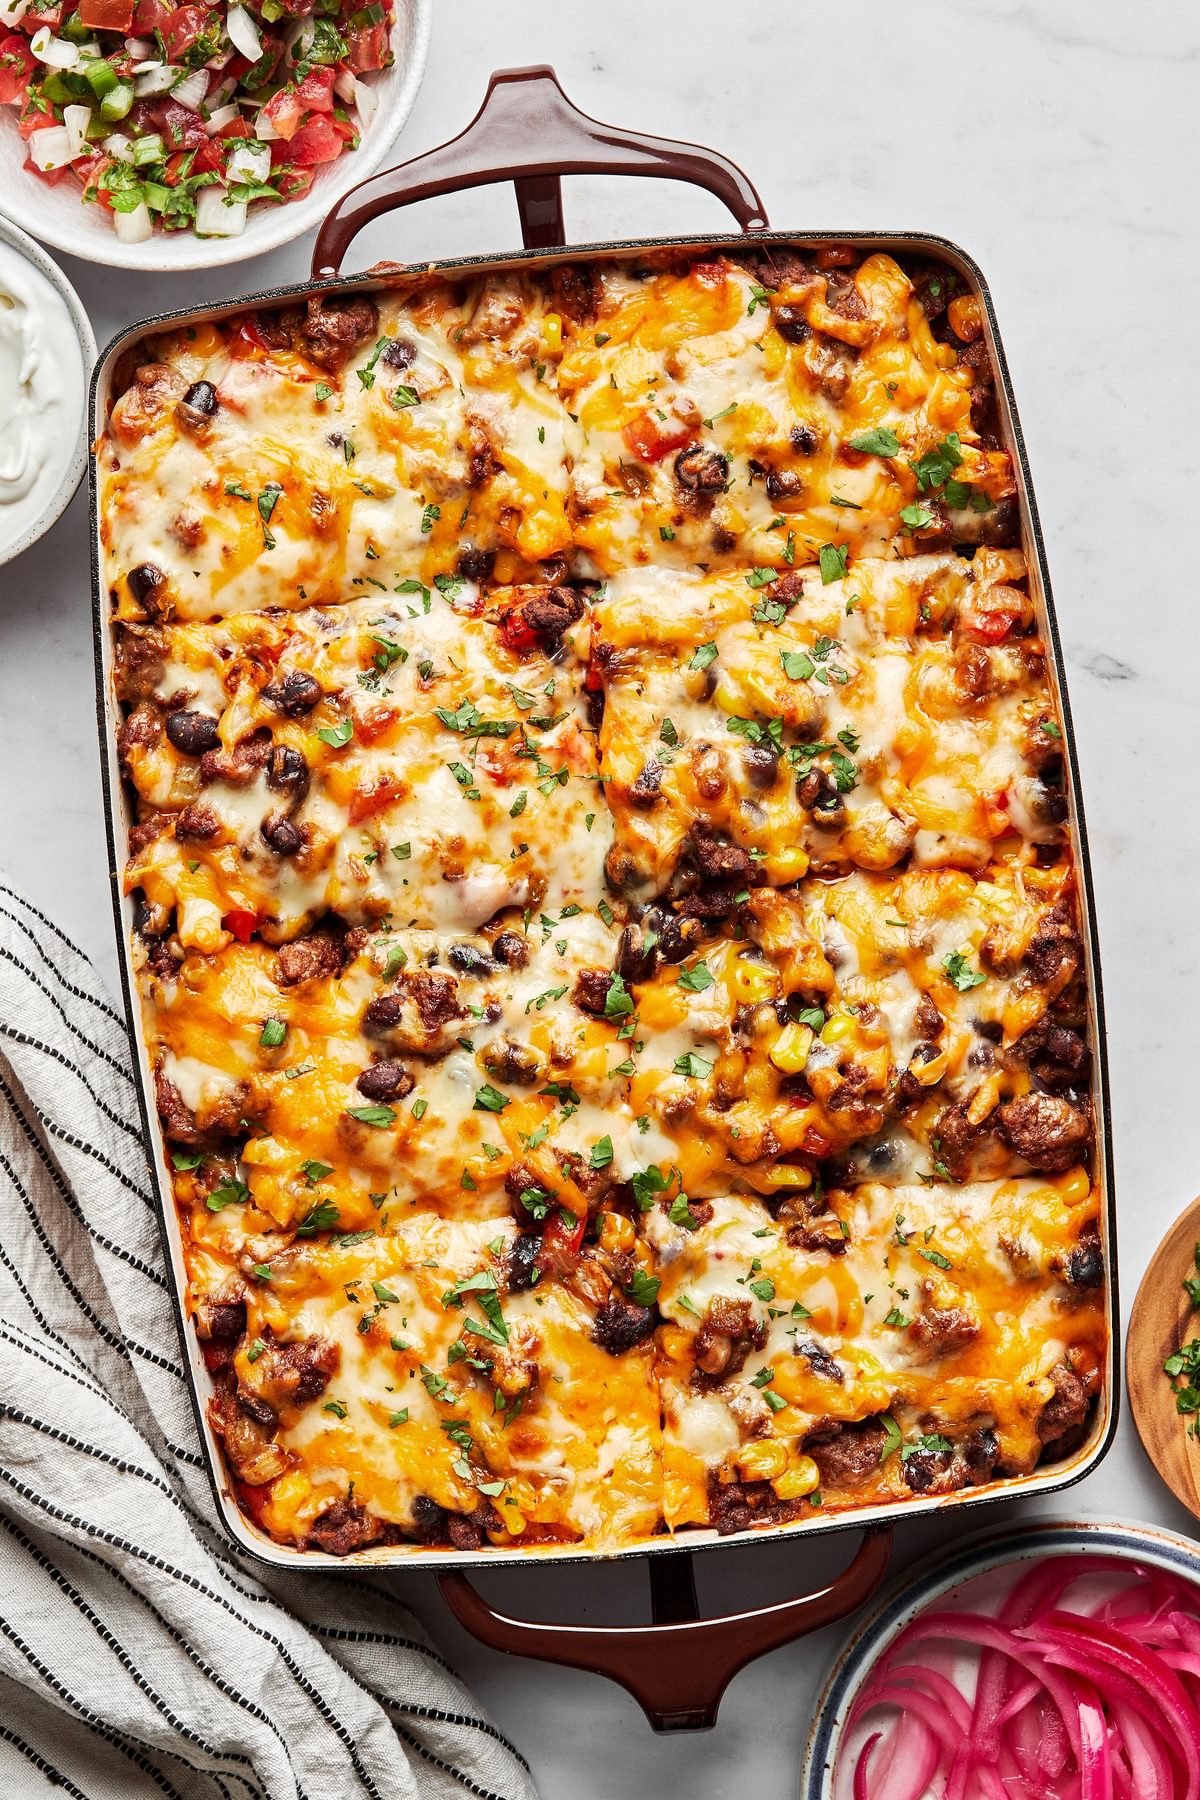 enchilada casserole in a baking dish made with ground beef, black beans, corn, peppers, onions, chiles and cheese